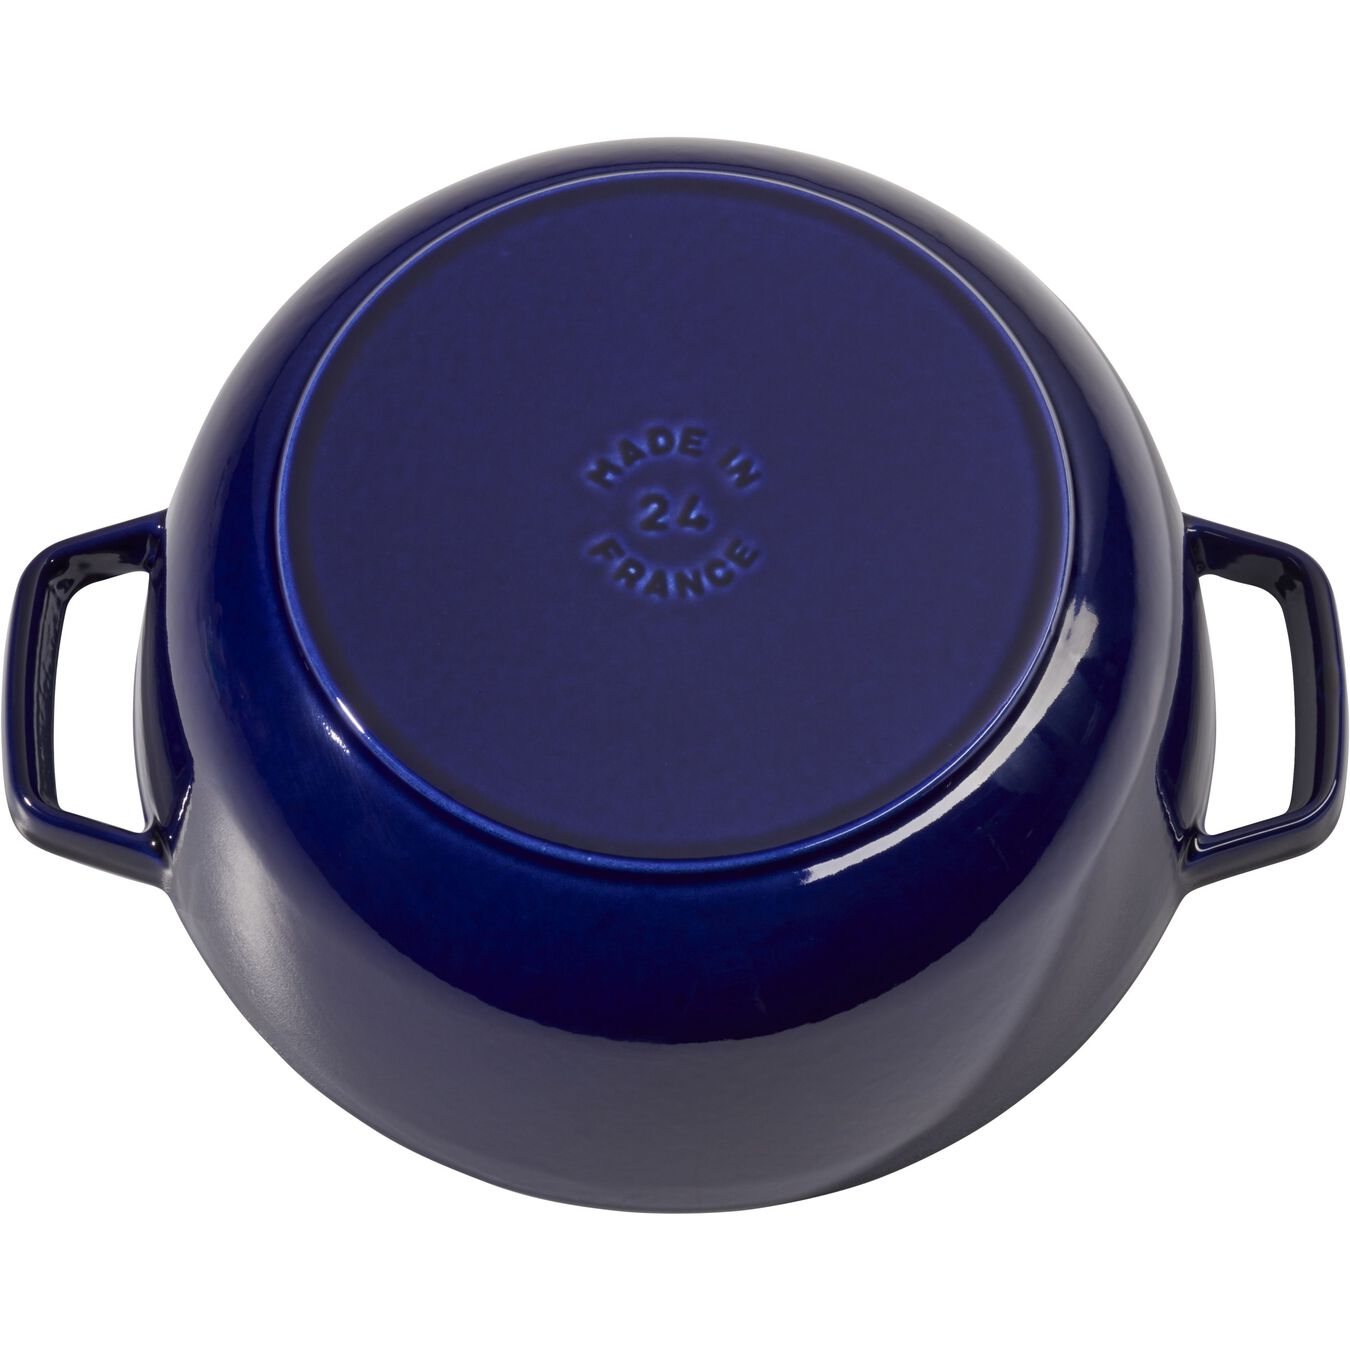 3.6 l cast iron round French oven, dark-blue,,large 4